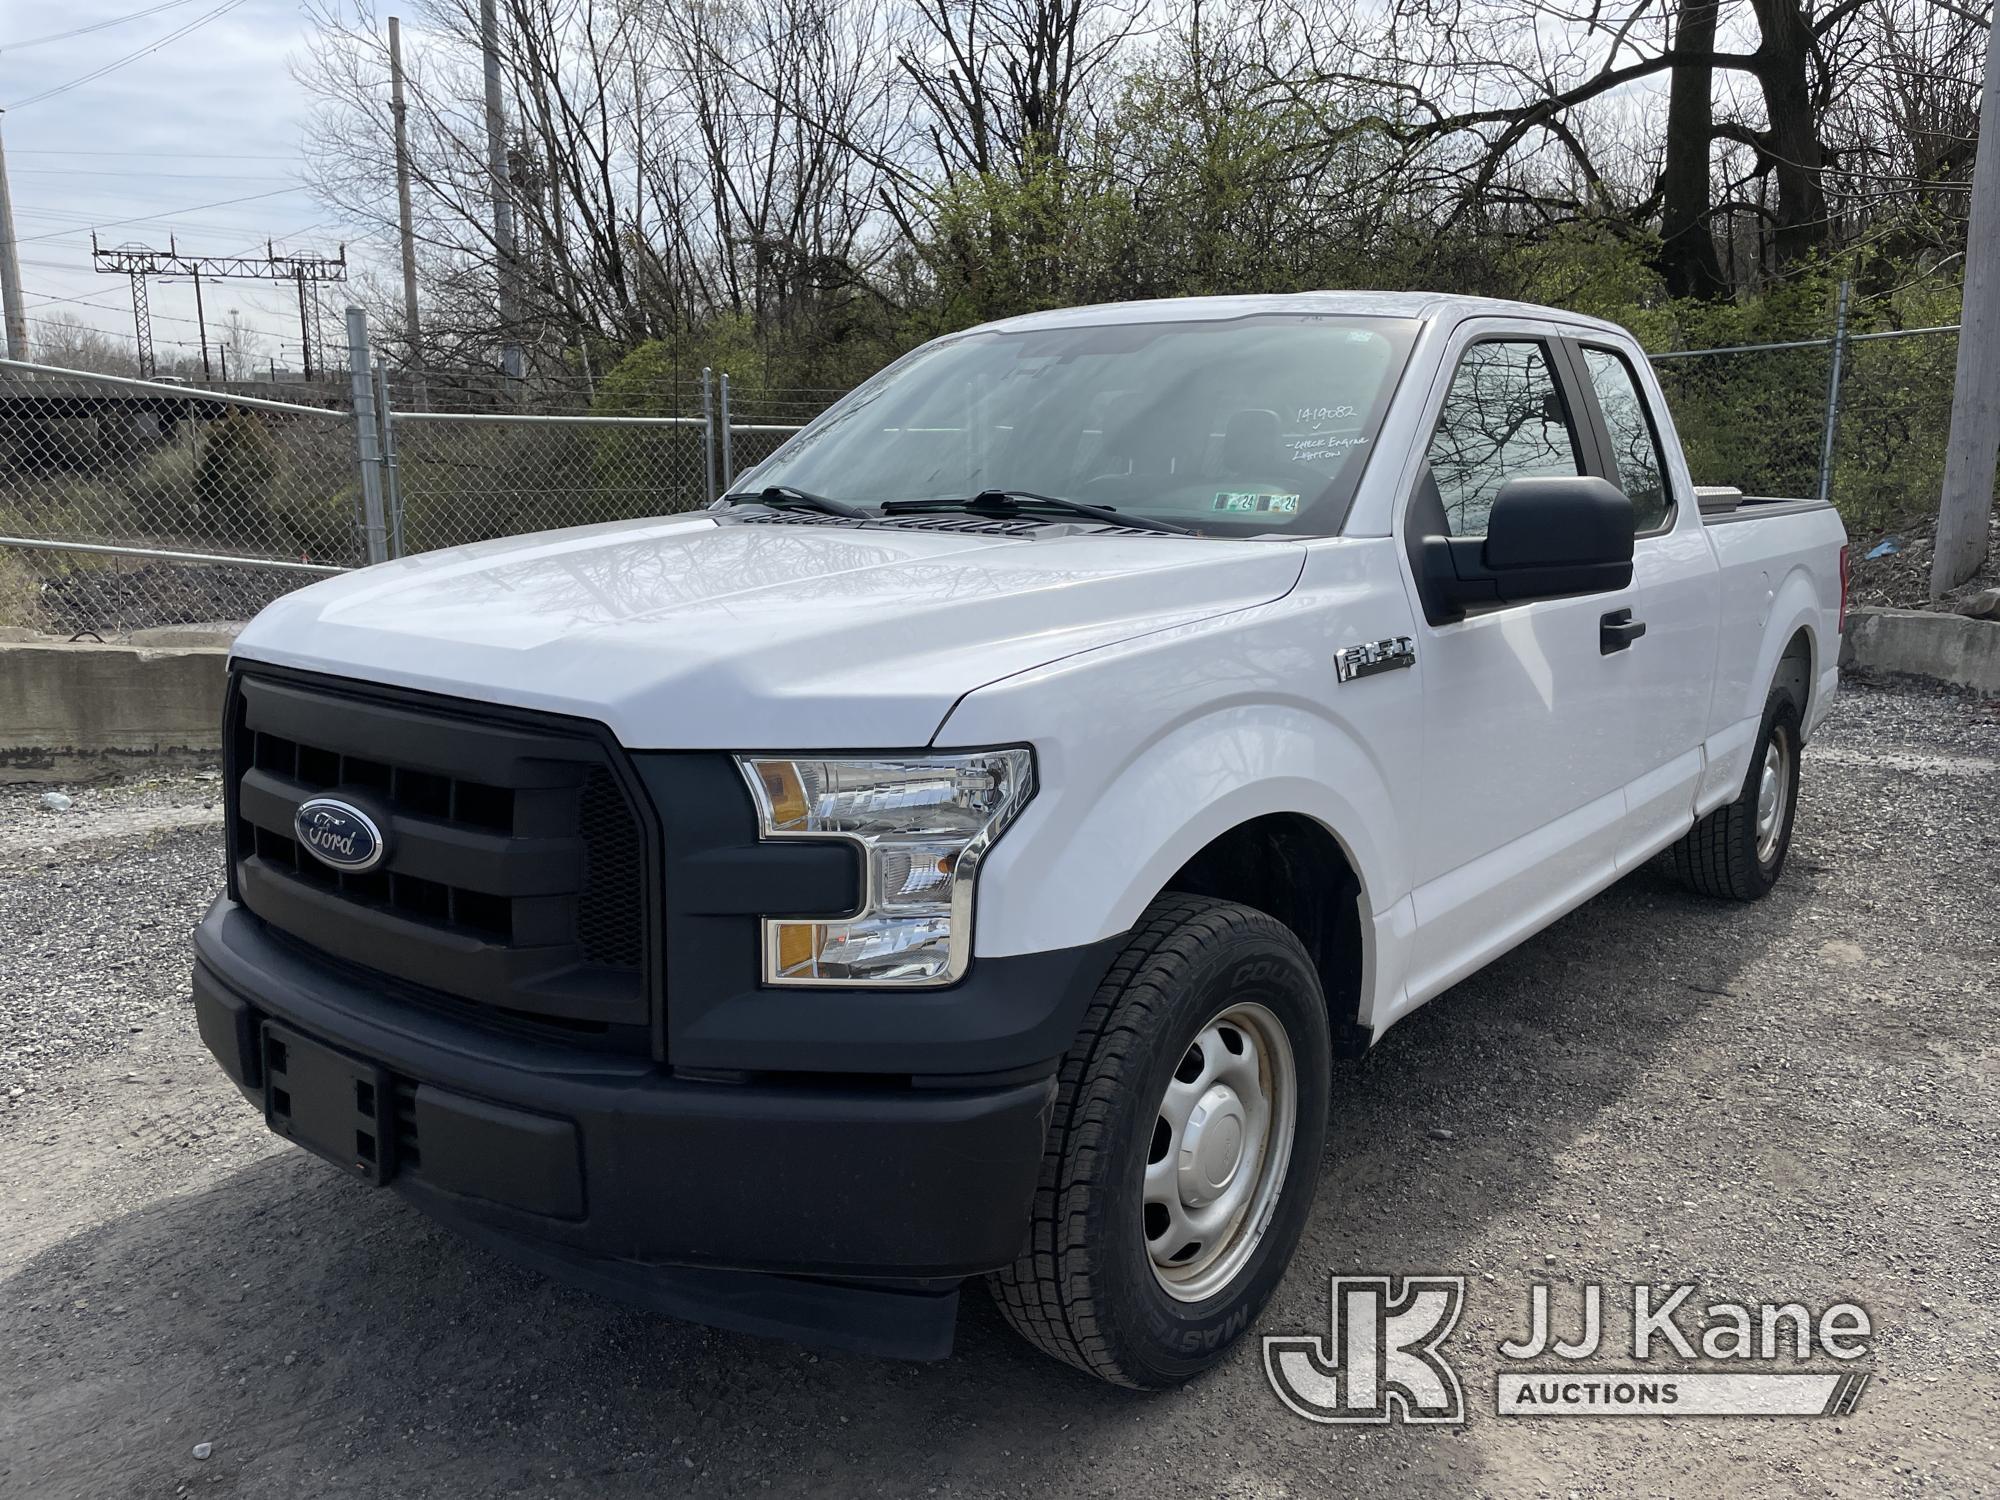 (Plymouth Meeting, PA) 2017 Ford F150 Extended-Cab Pickup Truck Runs & Moves, Body & Rust Damage, Ch